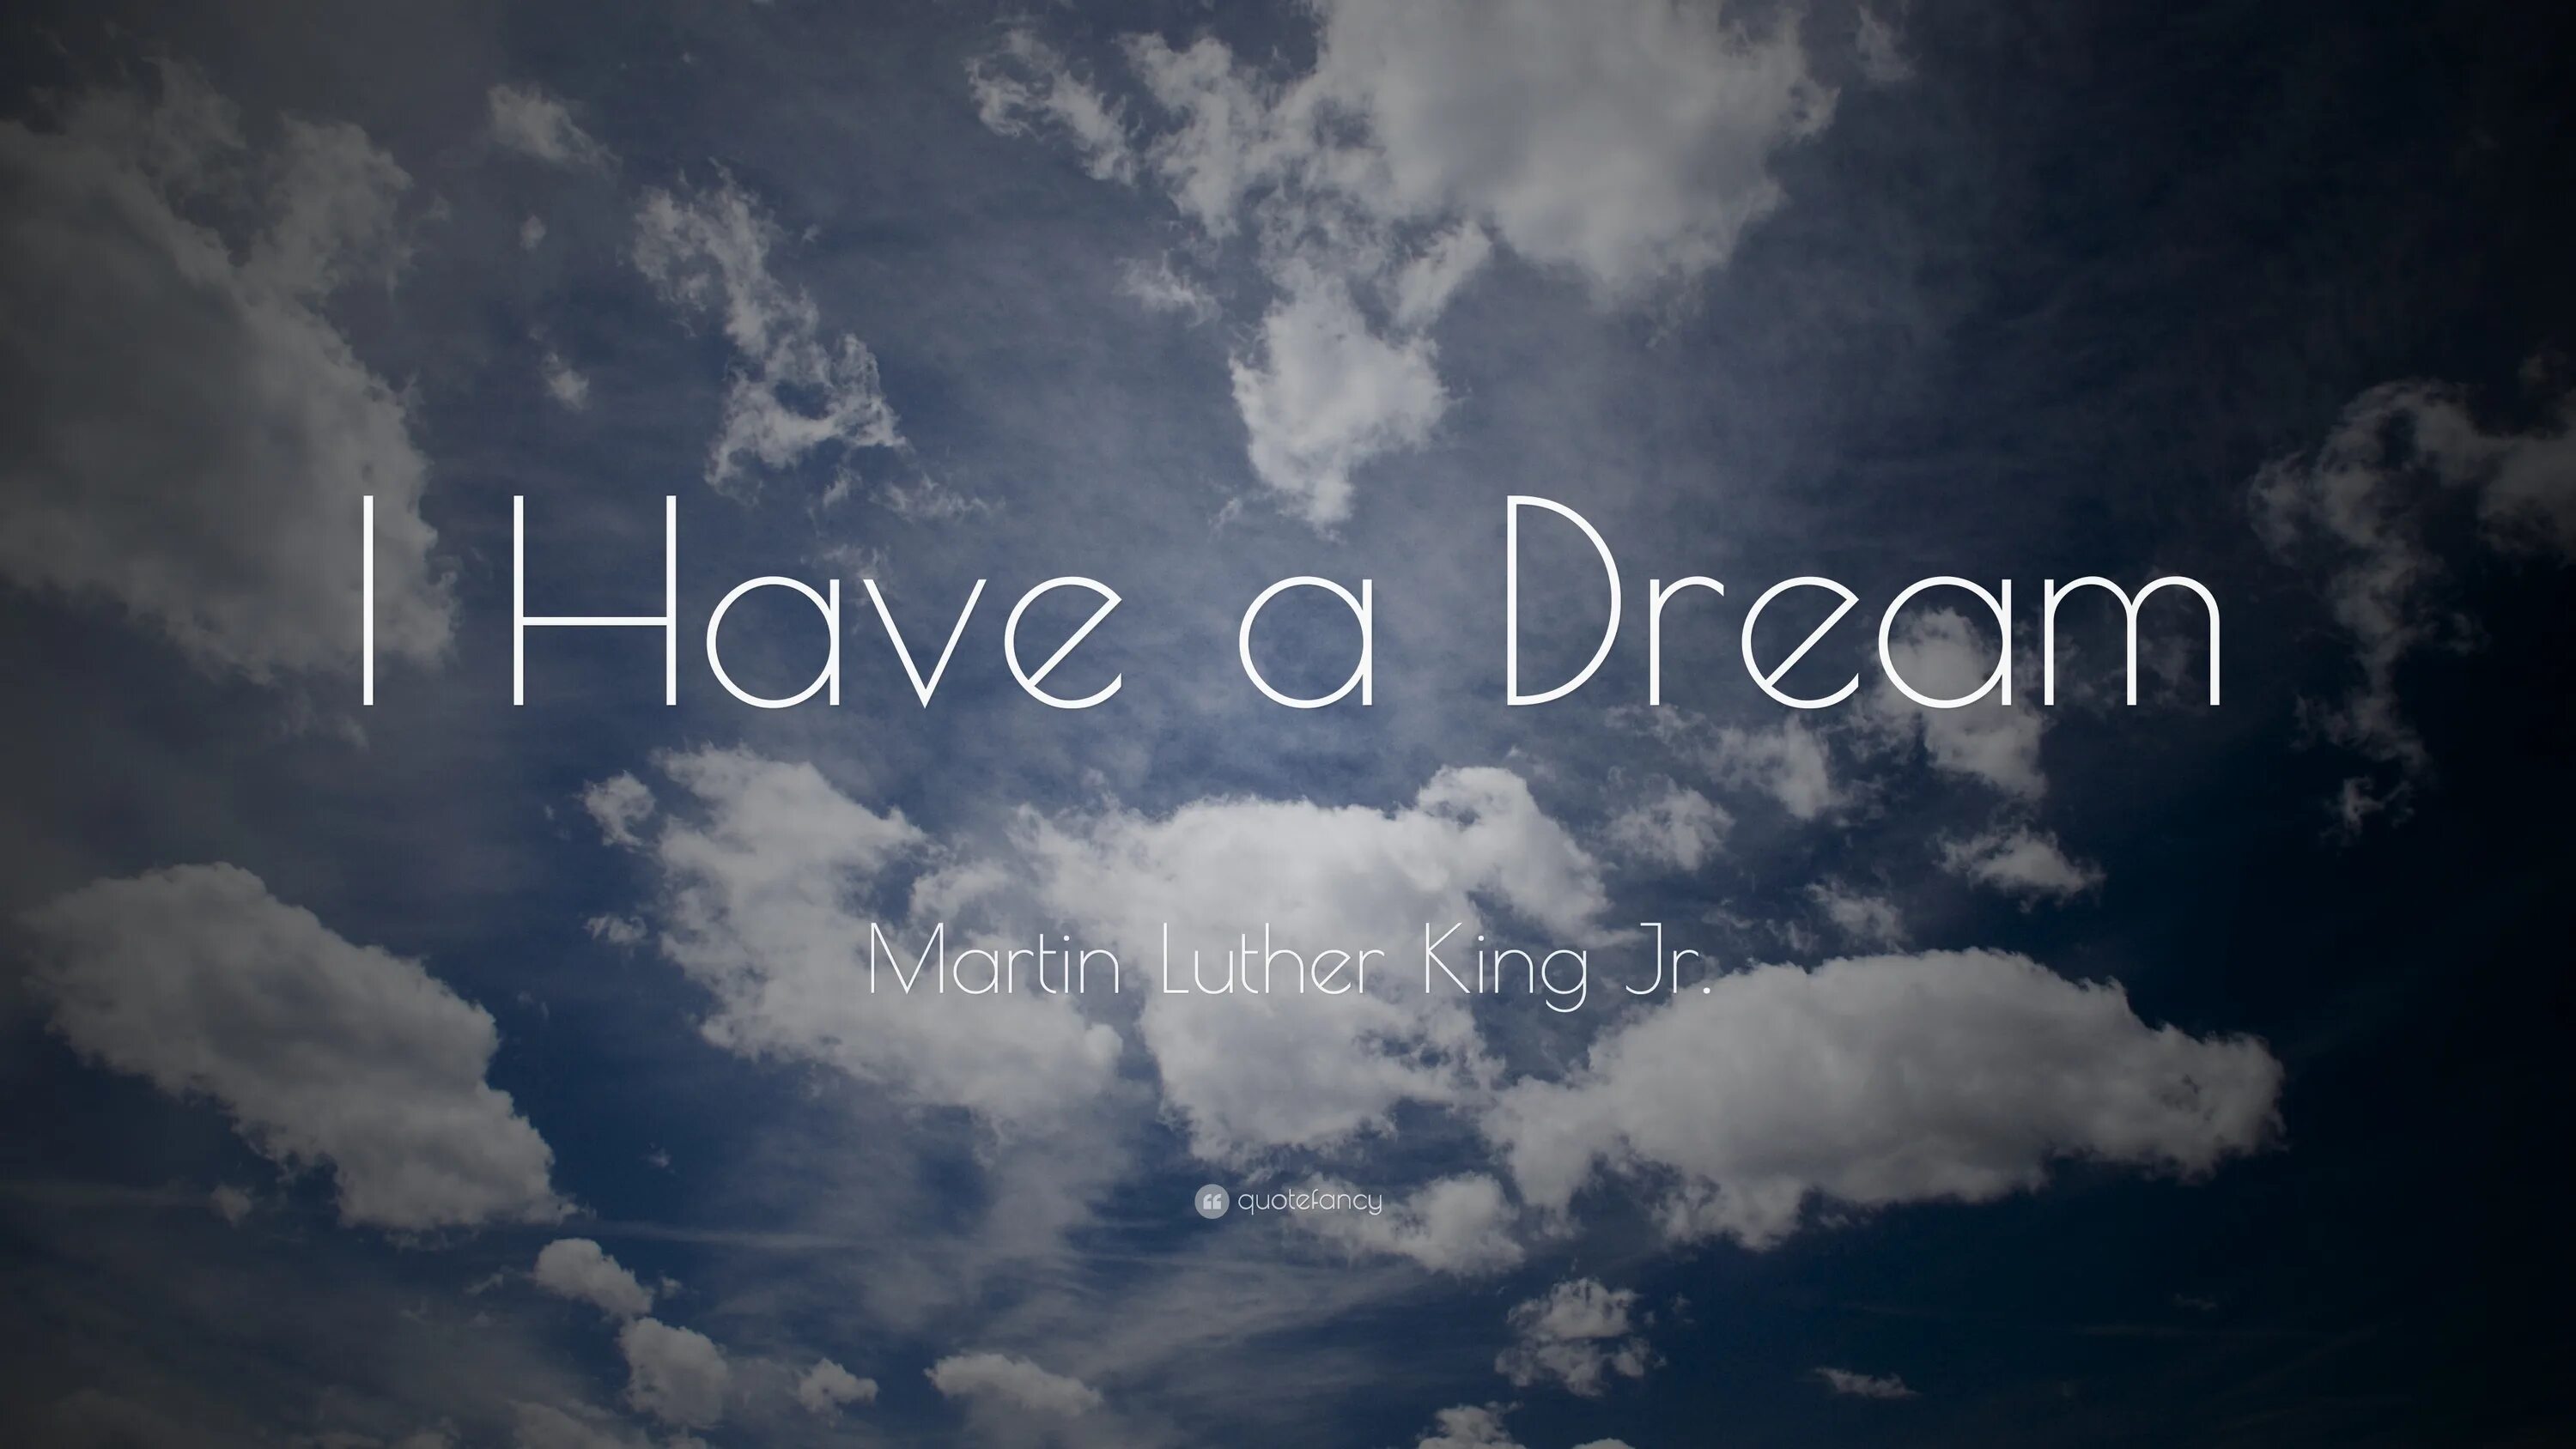 He has a dream. I have a Dream надпись. I have a Dream Martin Luther King. I have a Dream картинки. I have a Dream King.